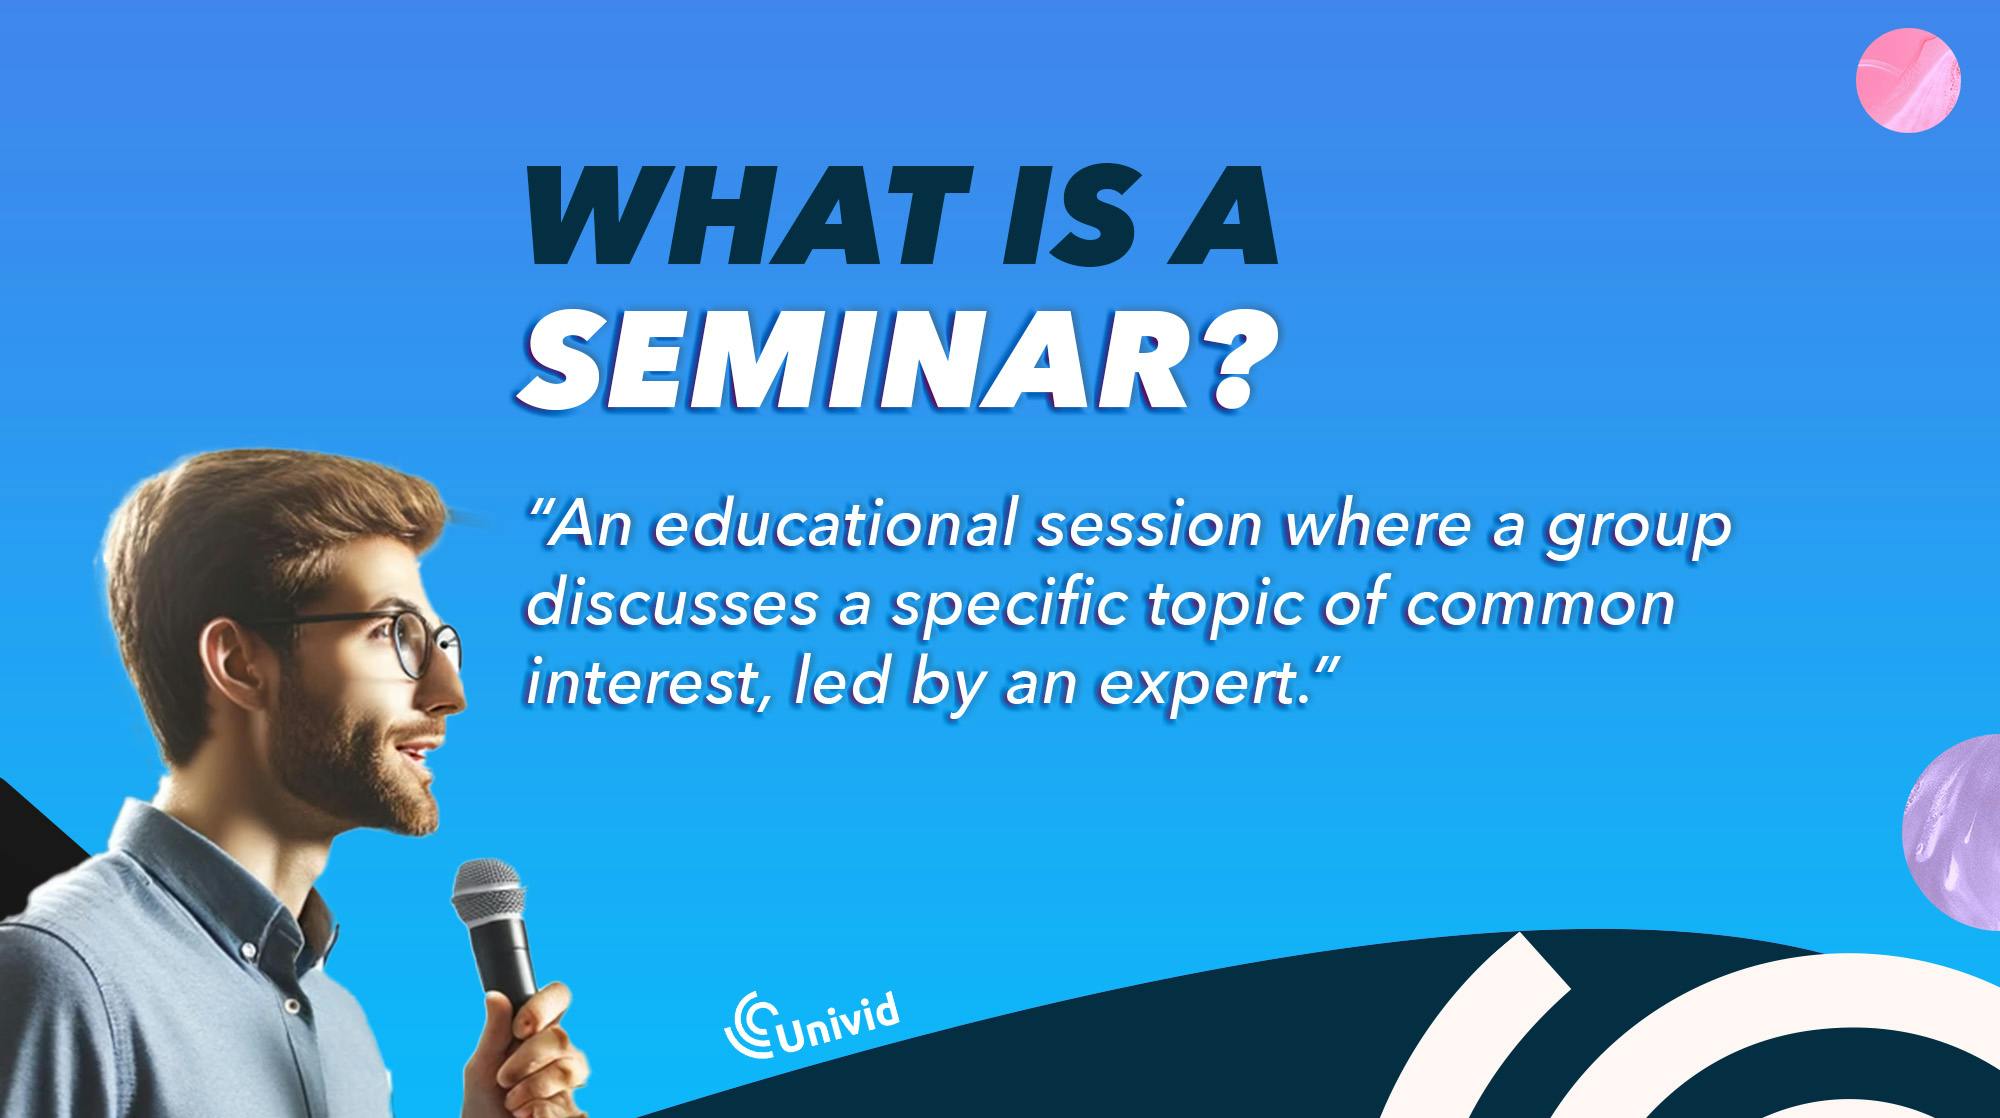 What is a seminar? The definition